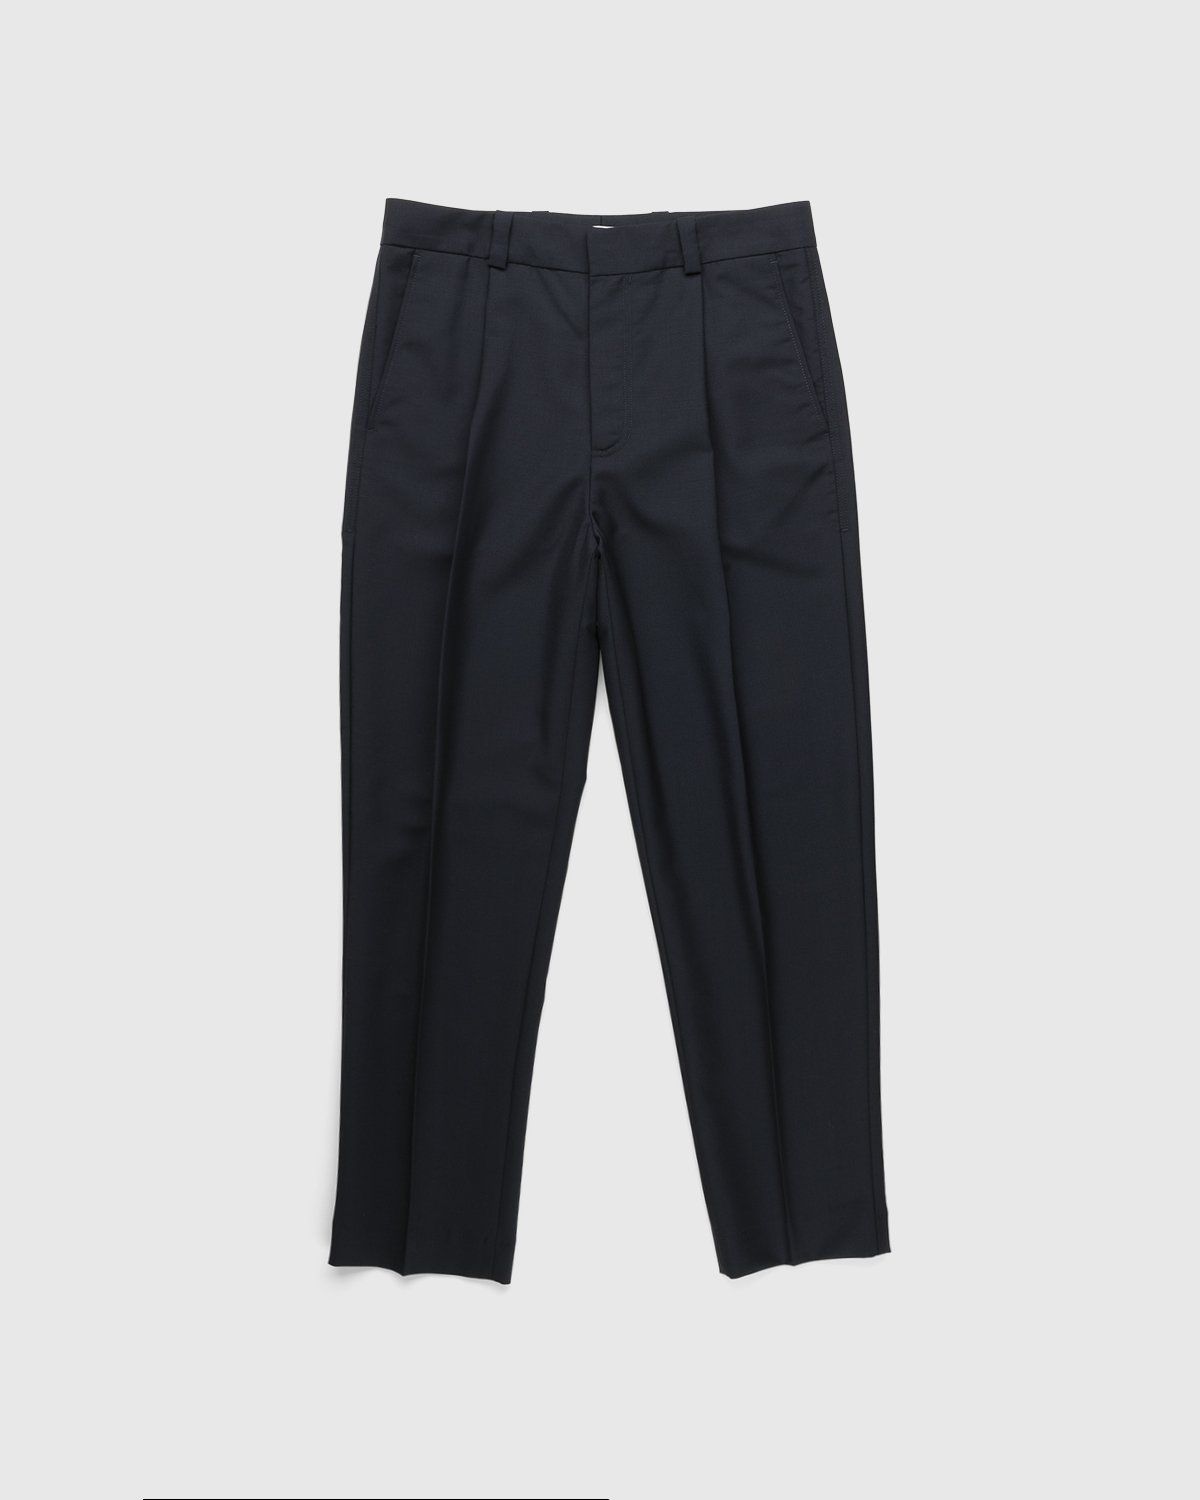 Acne Studios – Mohair Pleated Trousers Navy - Pants - Blue - Image 1